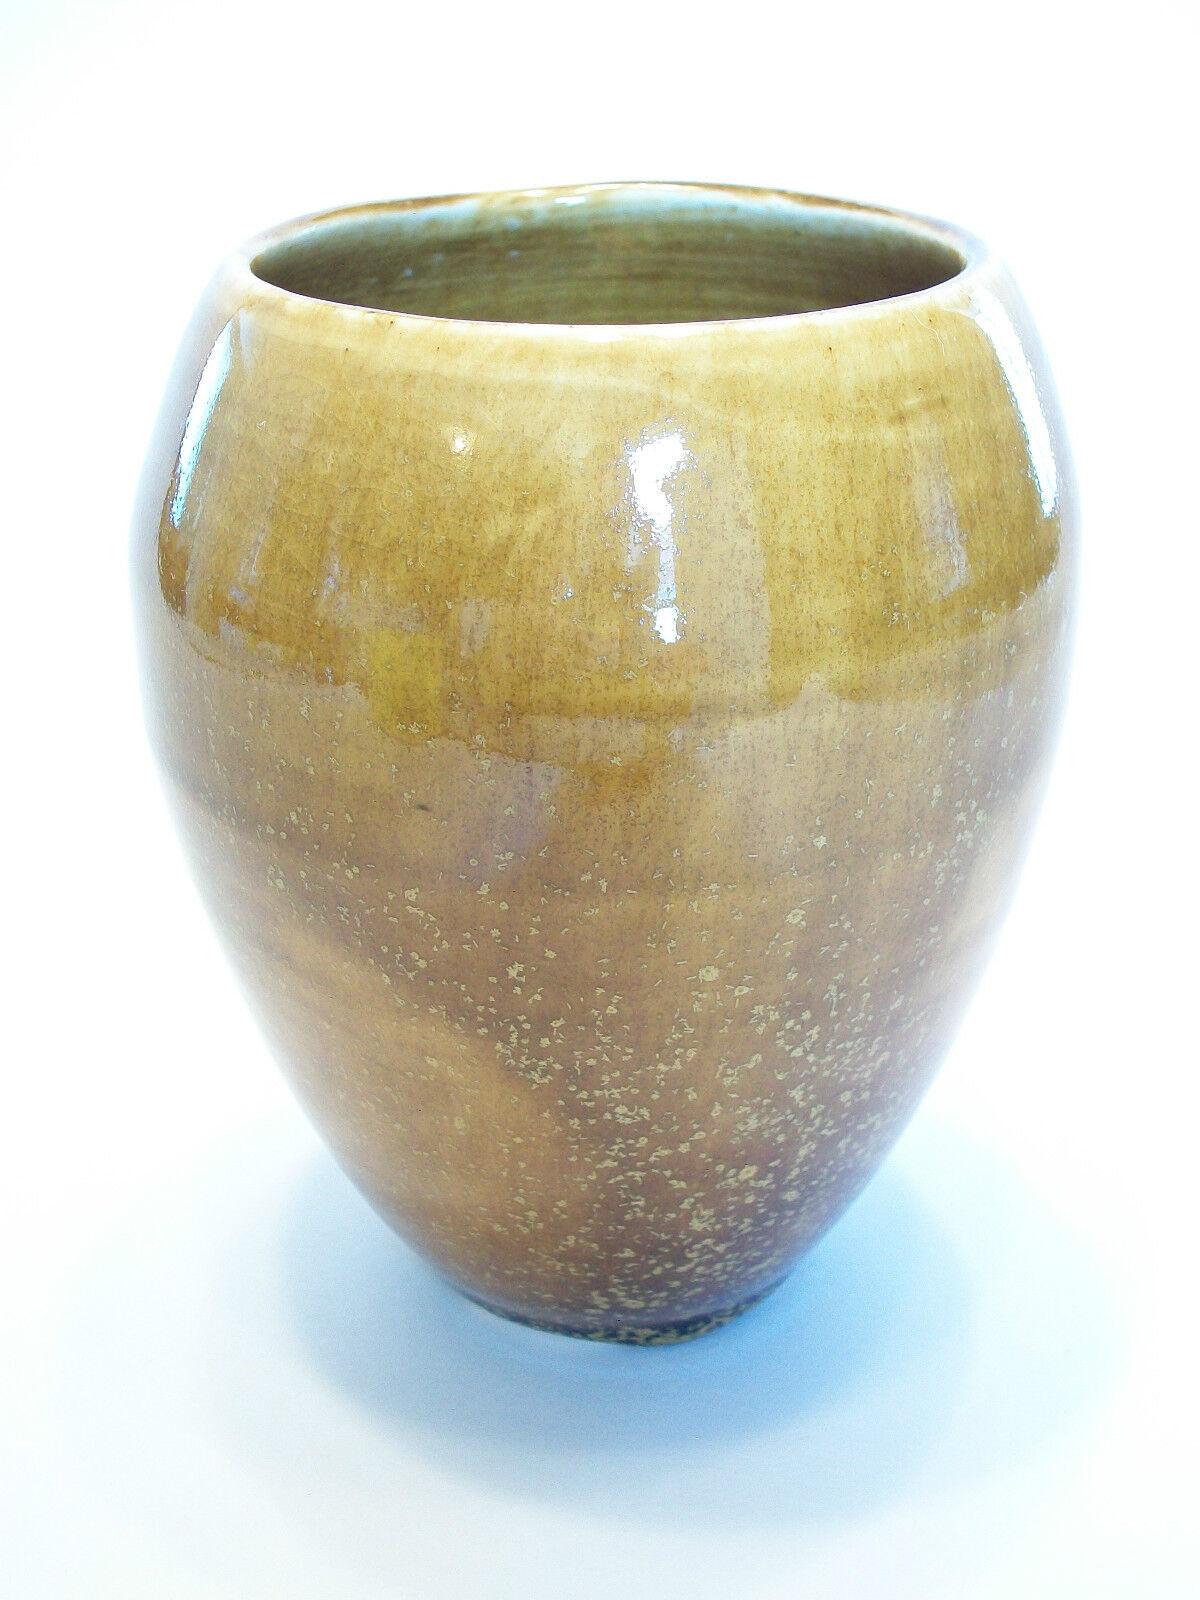 Canadian Vintage Glazed/Thrown Studio Pottery Vase - Signed - Canada - Late 20th Century For Sale